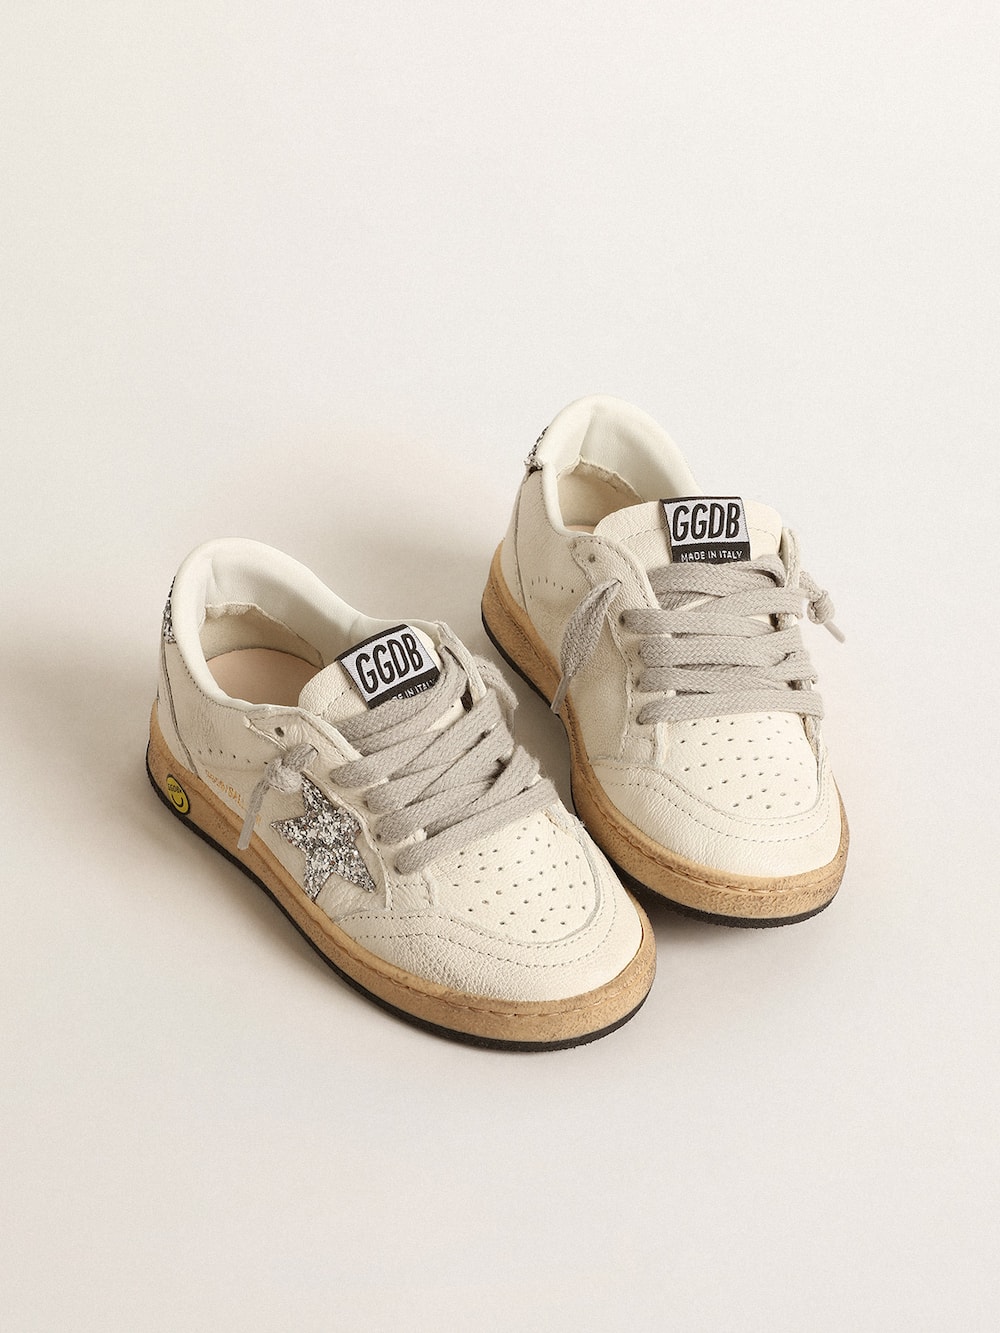 Golden Goose - Ball Star Junior in nappa with silver glitter star and heel tab in 